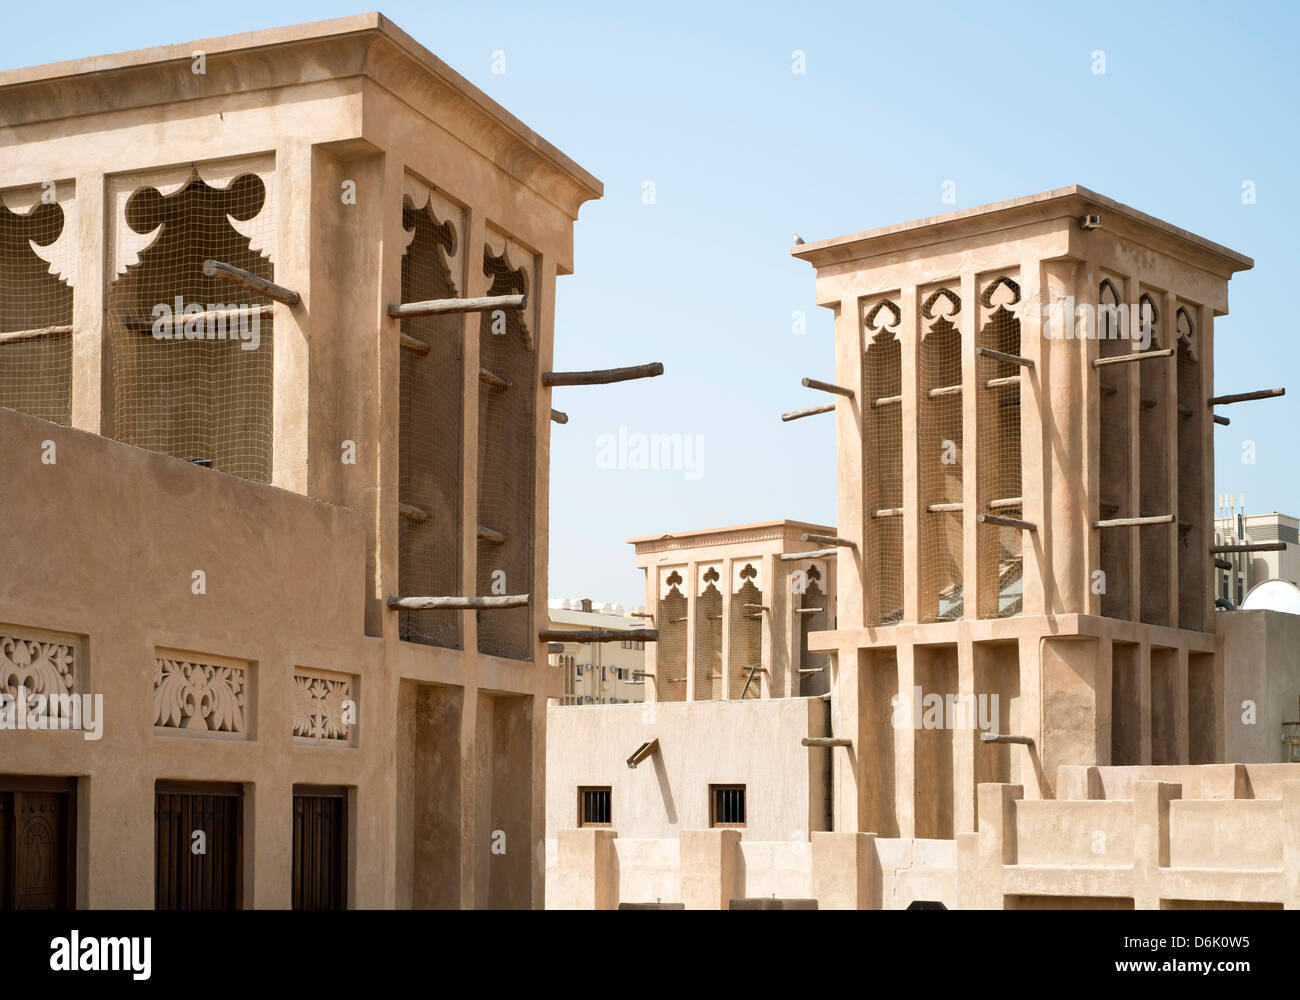 Traditional historical architecture with wind towers in Al Bastakiya historical district in Bur Dubai United Arab Emirates Stock Photo